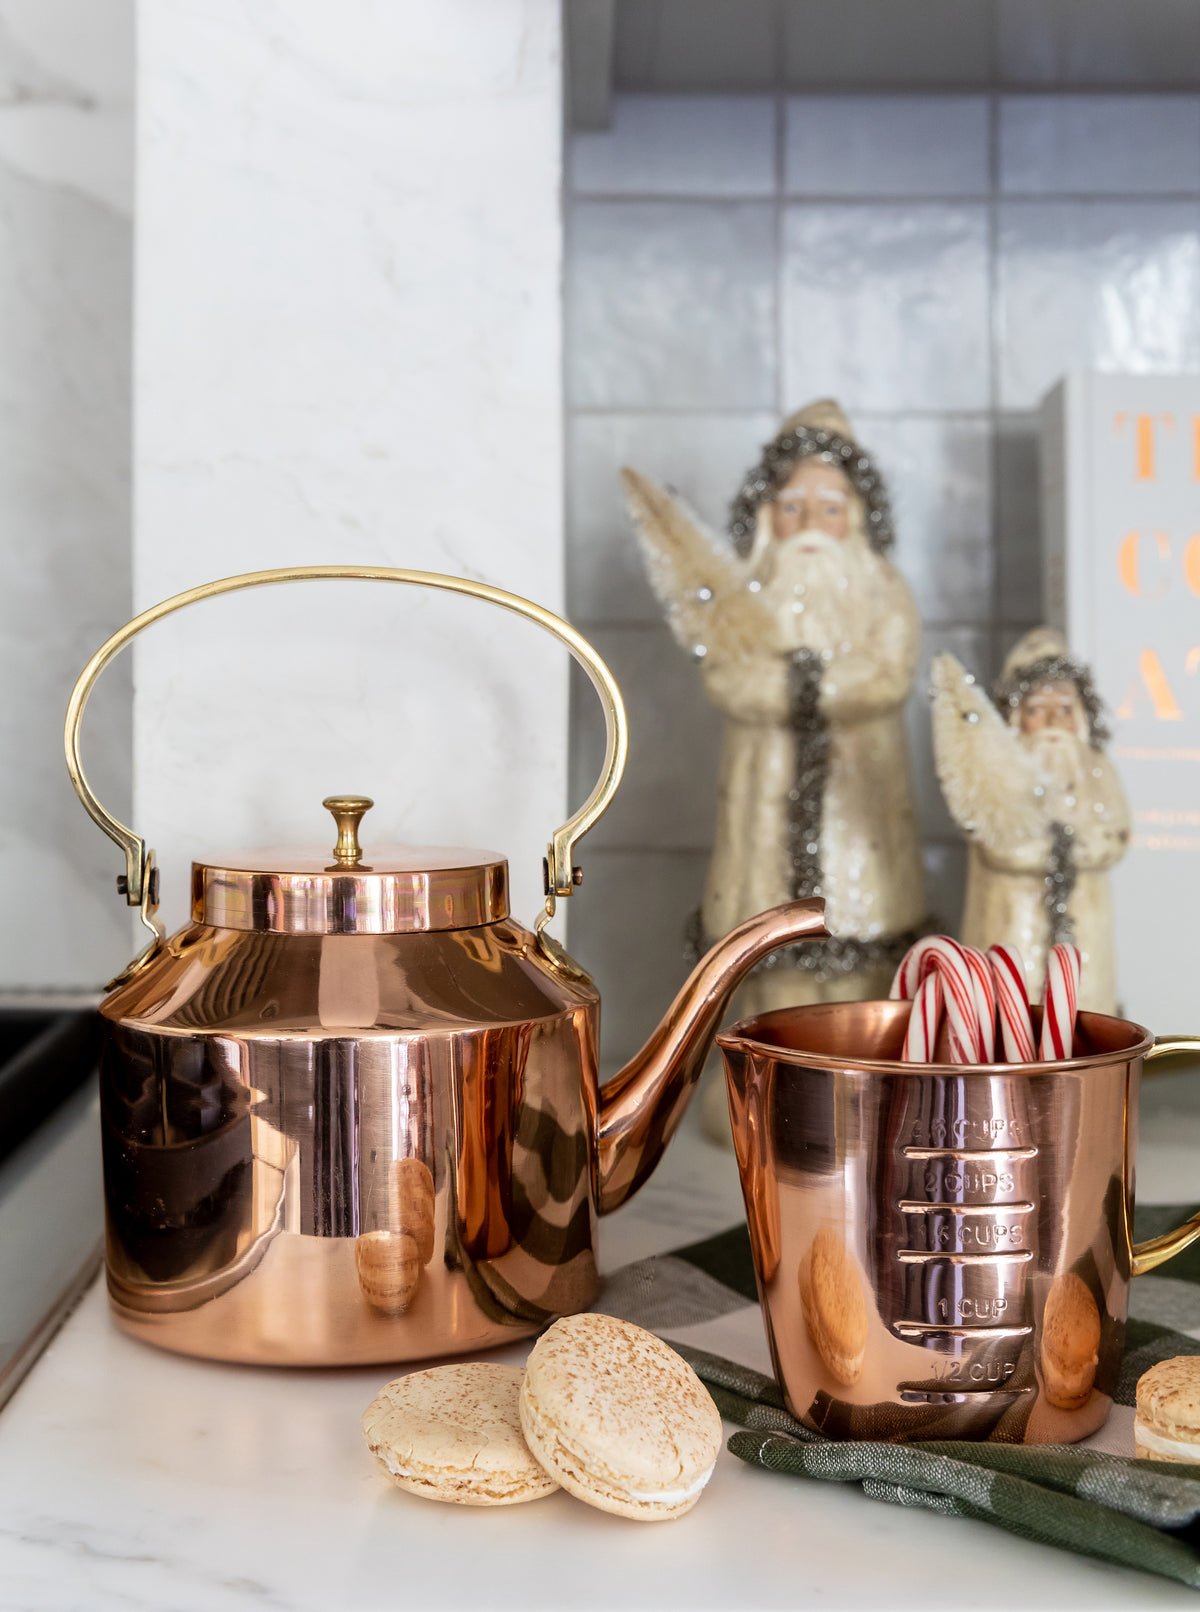 https://www.houseofjadehome.shop/wp-content/uploads/1700/44/buy-the-best-english-copper-tea-kettle-galley-fen-cheap-sale-and-enjoy-unbeatable-prices_4.jpg